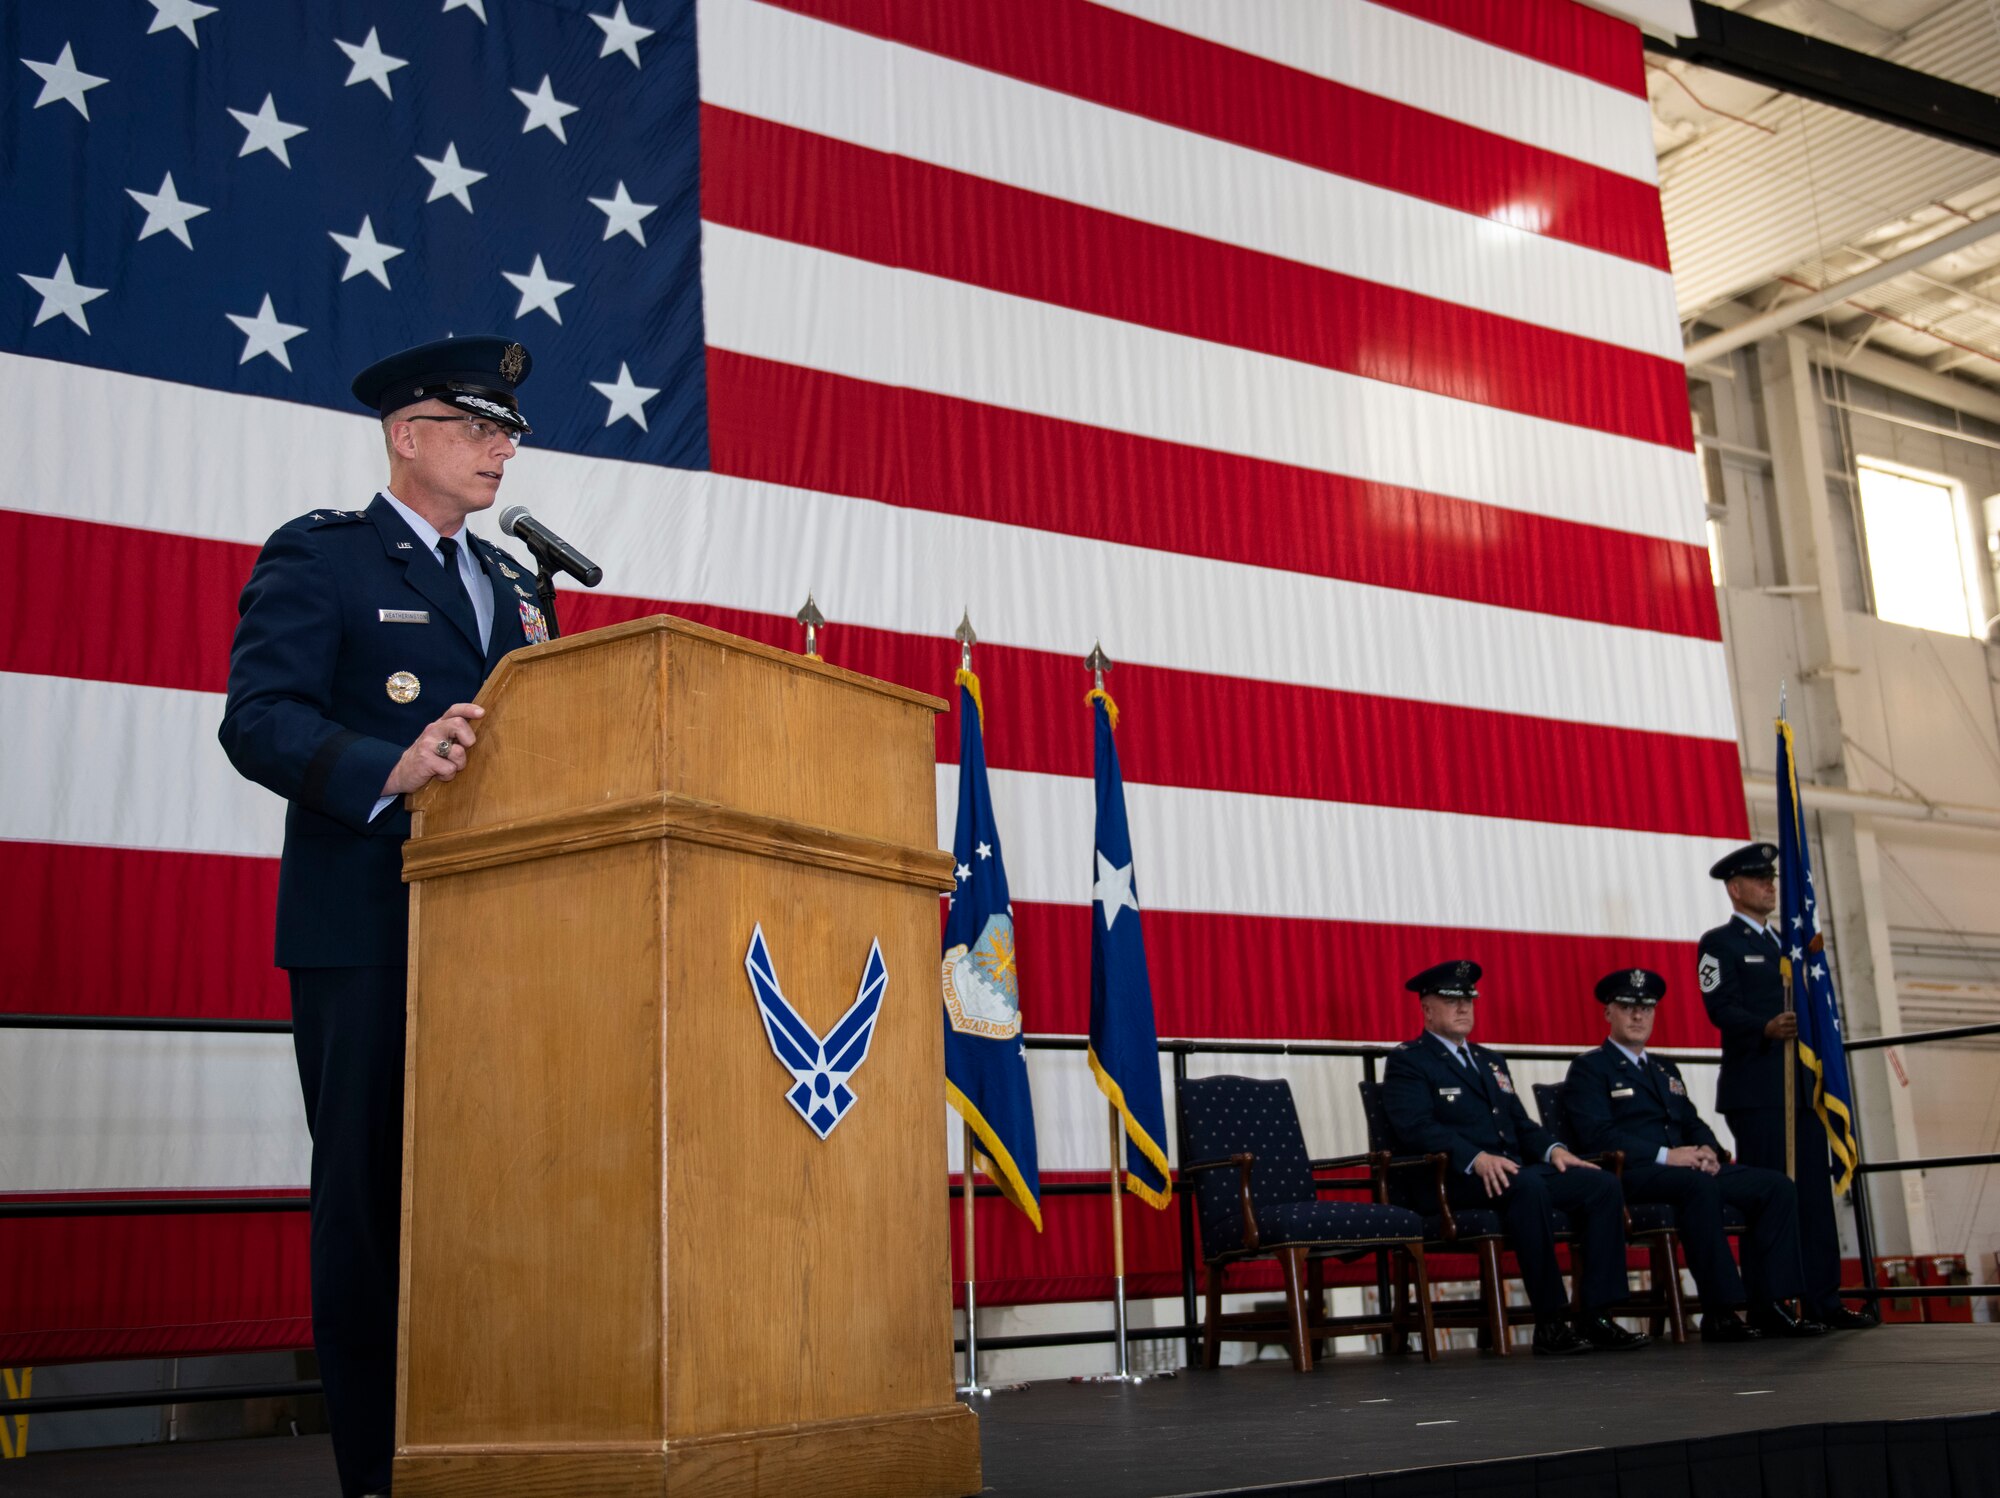 U.S. Air Force Maj. Gen. Mark Weatherington, Eighth Air Force and Commander Joint-Global Strike Operations Center, thanks Col. Jeffrey Schreiner, former 509th Bomb Wing commander, for his service and welcomes Col. Daniel Diehl, in-coming 509th BW commander, during the 509th BW change of command ceremony, Whiteman Air Force Base, Missouri, June 16, 2021. Military change-of-commands are a time-honored tradition that formally symbolizes the continuity of authority as the command passes from one individual to another. The transfer of command is physically represented by handing the command flag, the tangible symbol of the unit, from the outgoing commander to the new. (U.S. Air Force photo by Airman First Class Victoria Hommel)